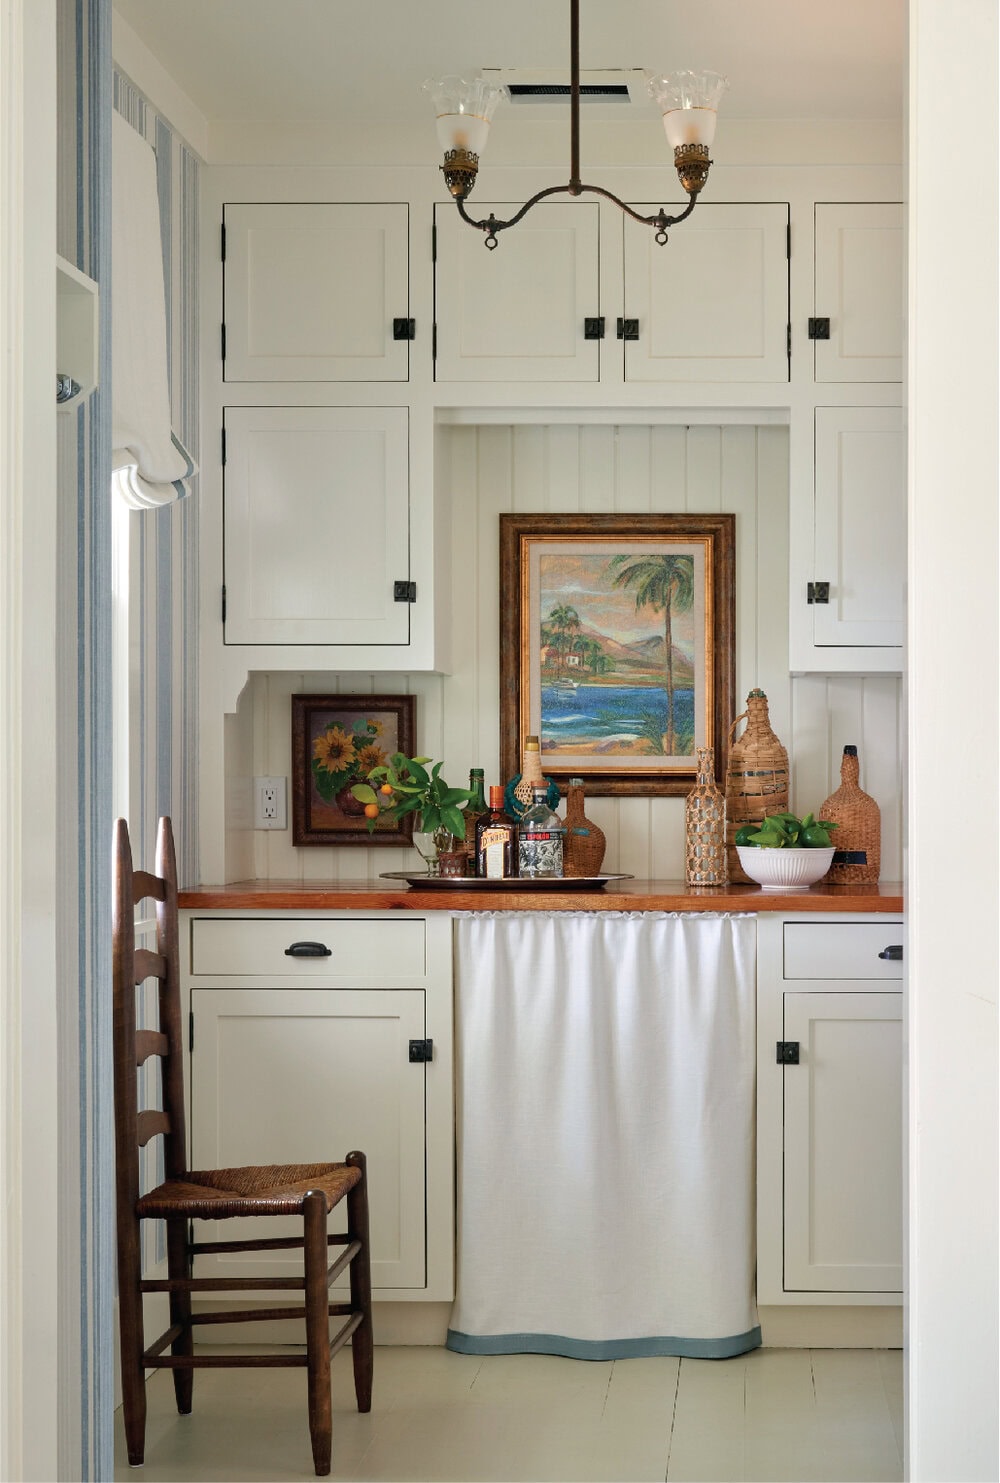 Rustic in white kitchen featured in interiors designed by Heather Chadduck